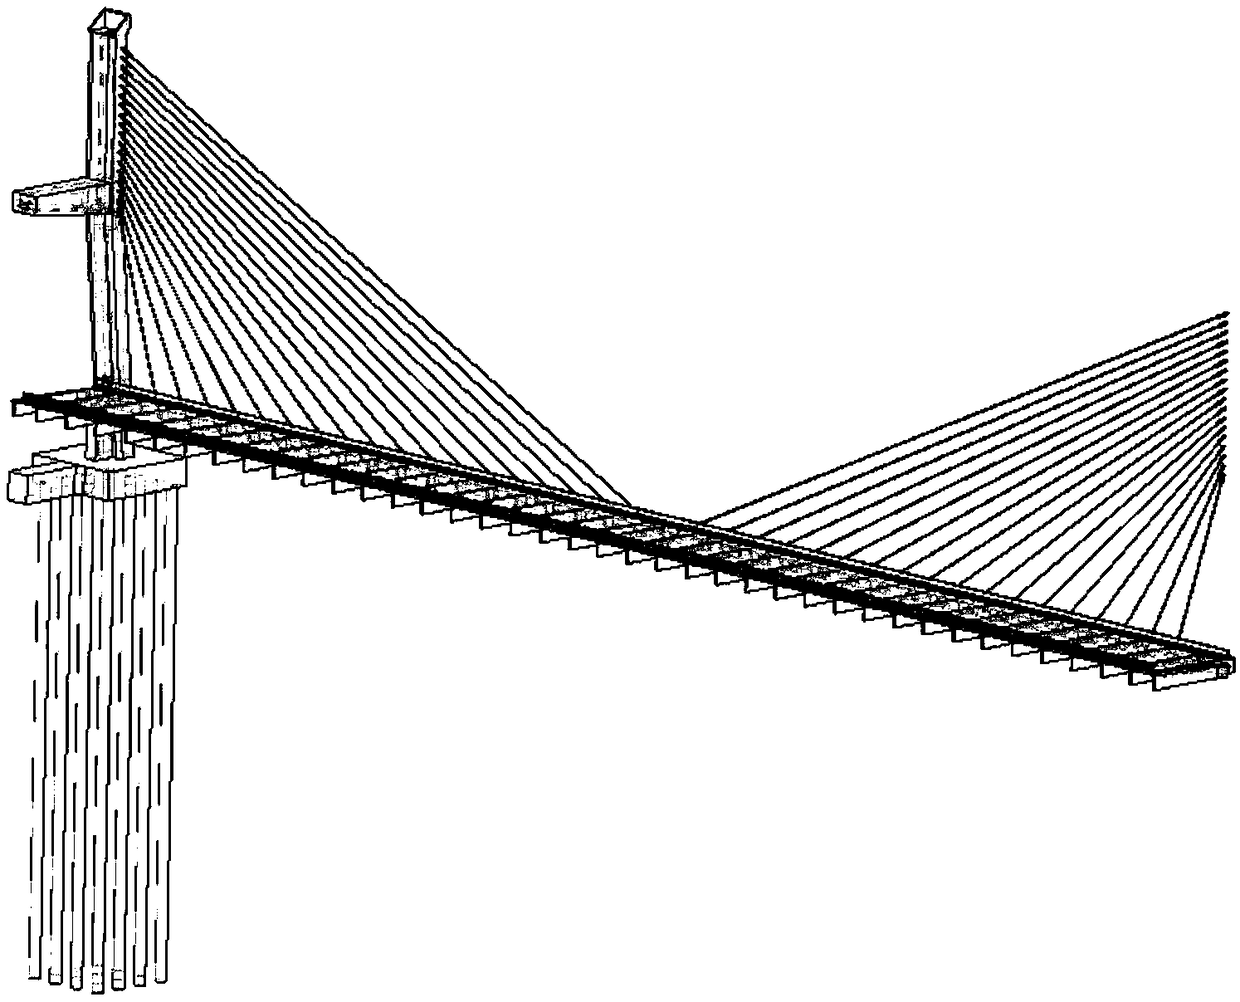 Structural hierarchical modeling method based on INVENTOR for bridge tube maintenance process